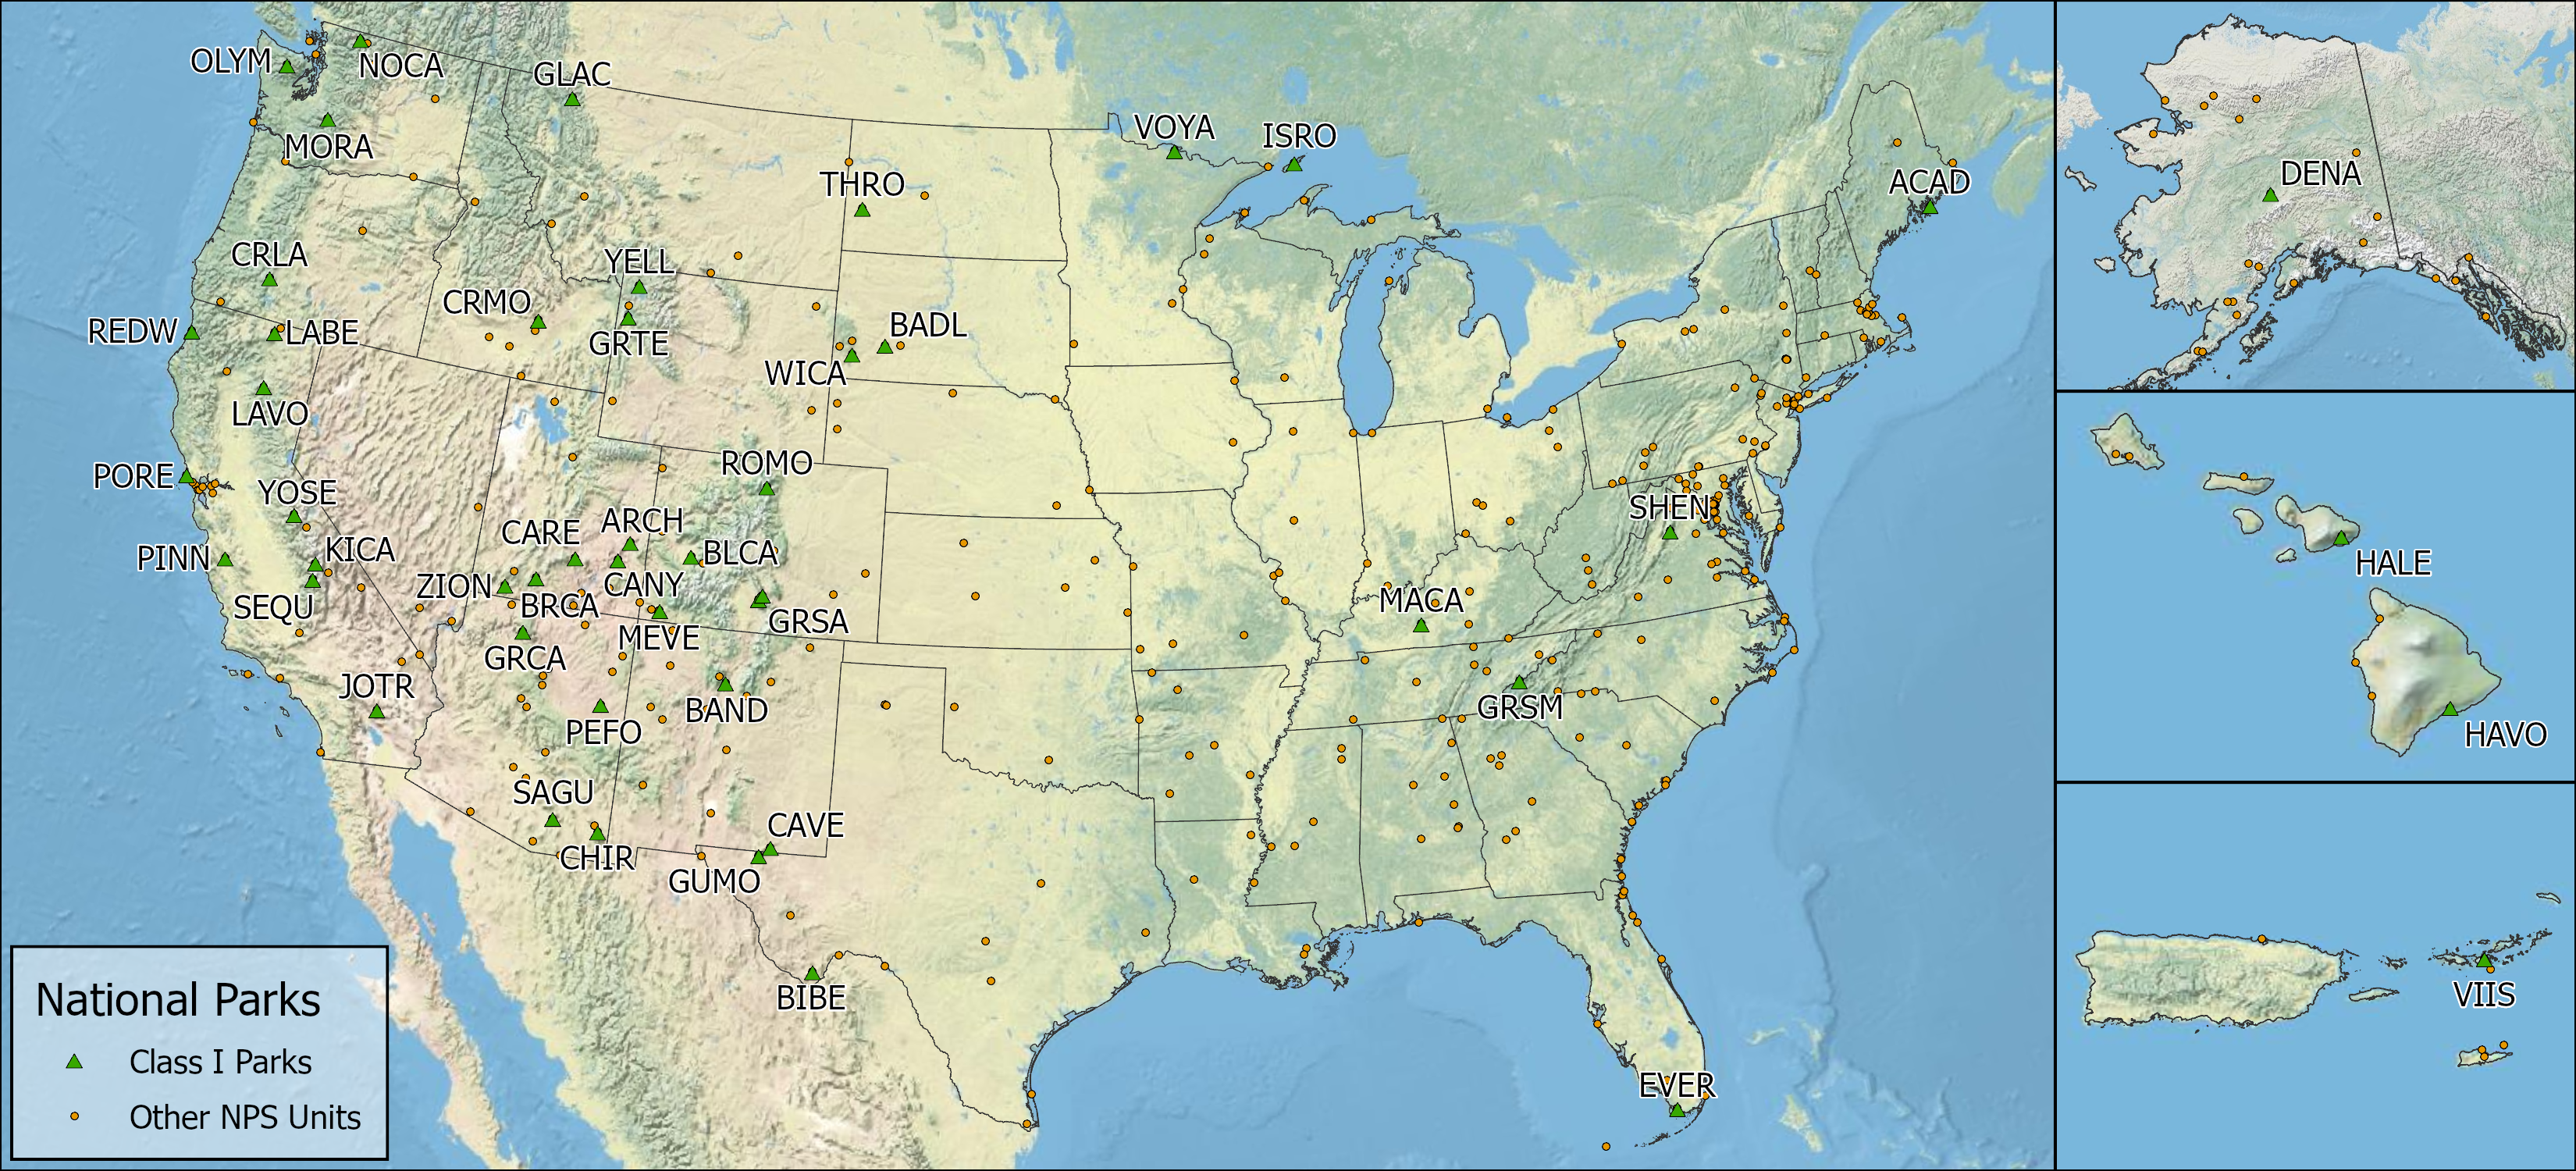 Map with Class I National Parks in the continental US, Alaska, Hawaii, and the Caribbean.